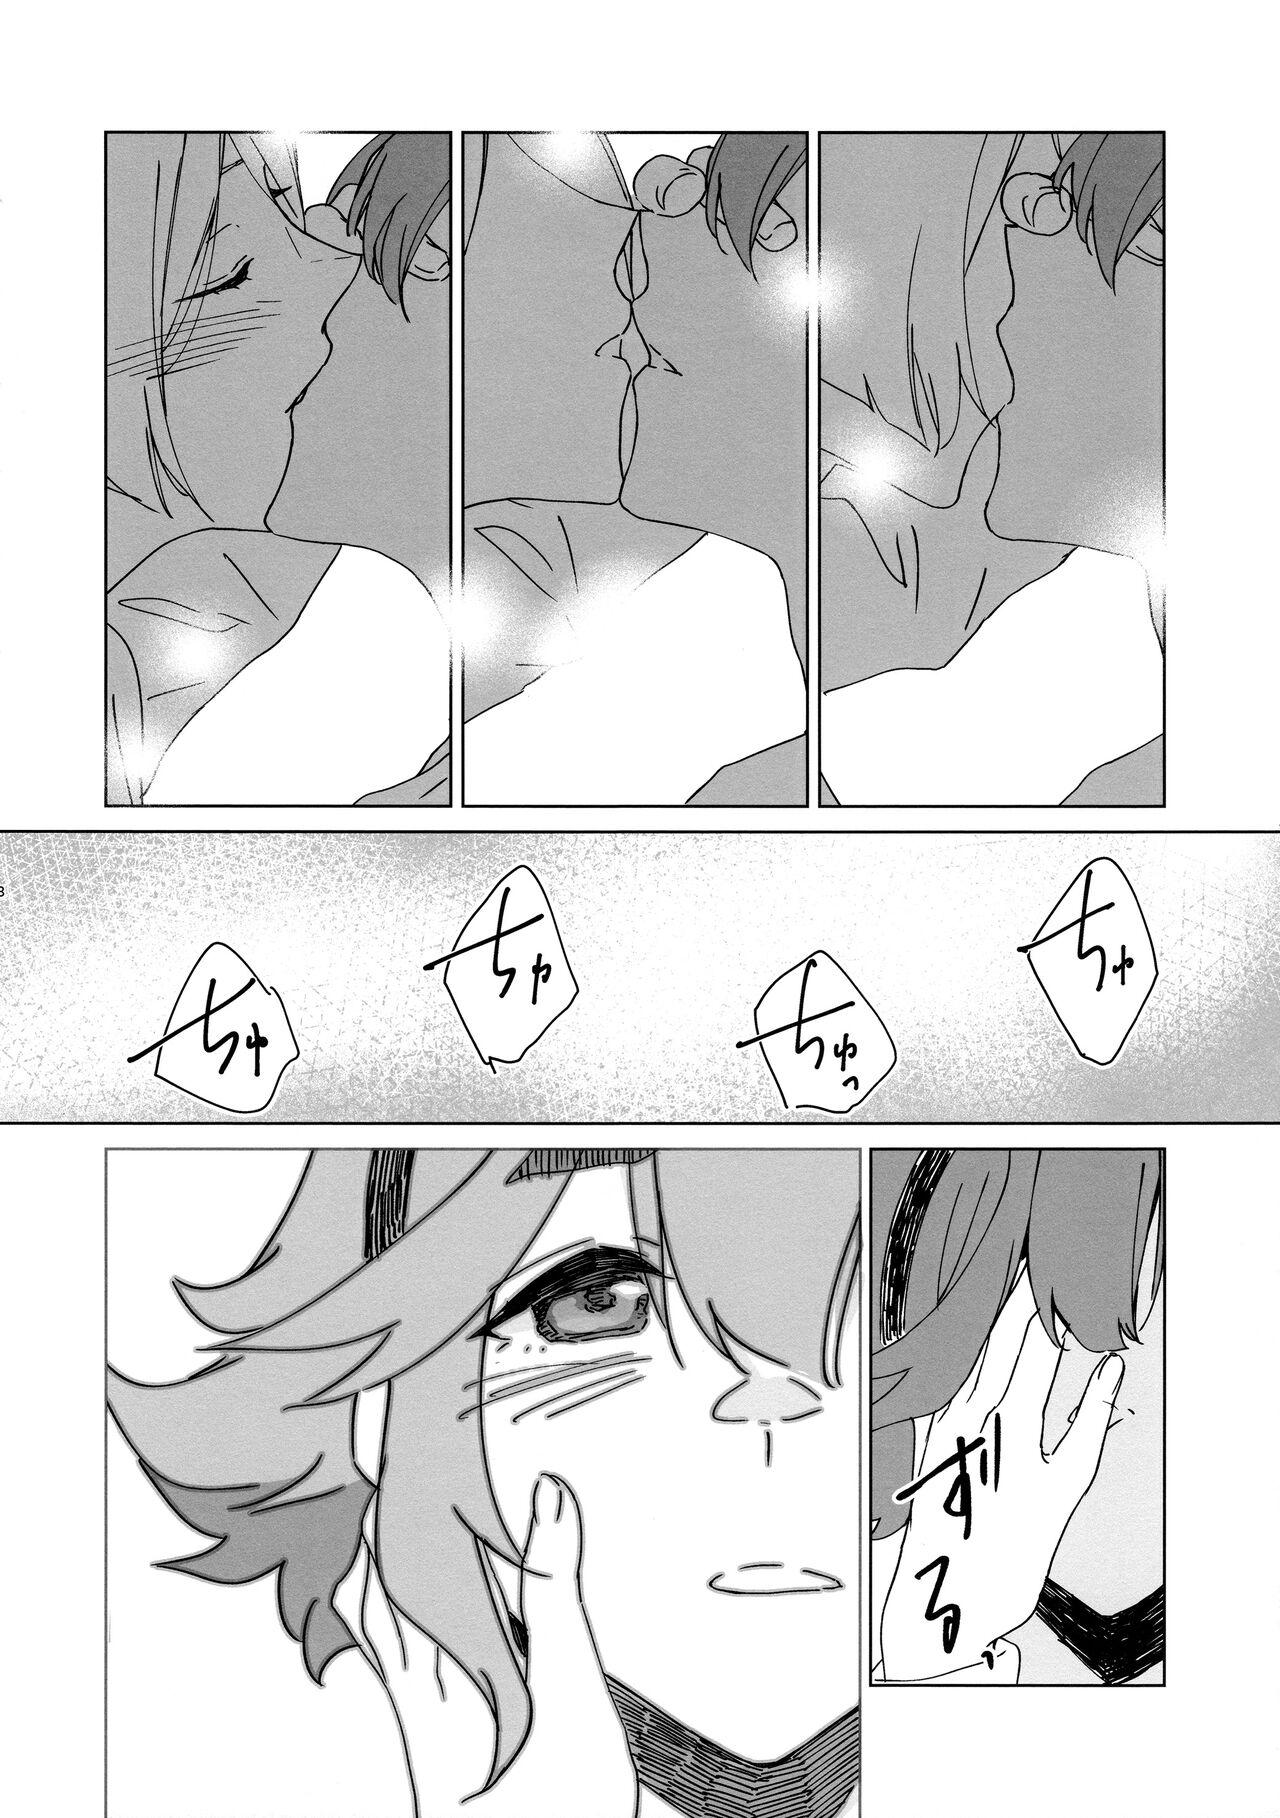 Office Kiss Kiss Kiss - Mobile suit gundam the witch from mercury Sperm - Page 8